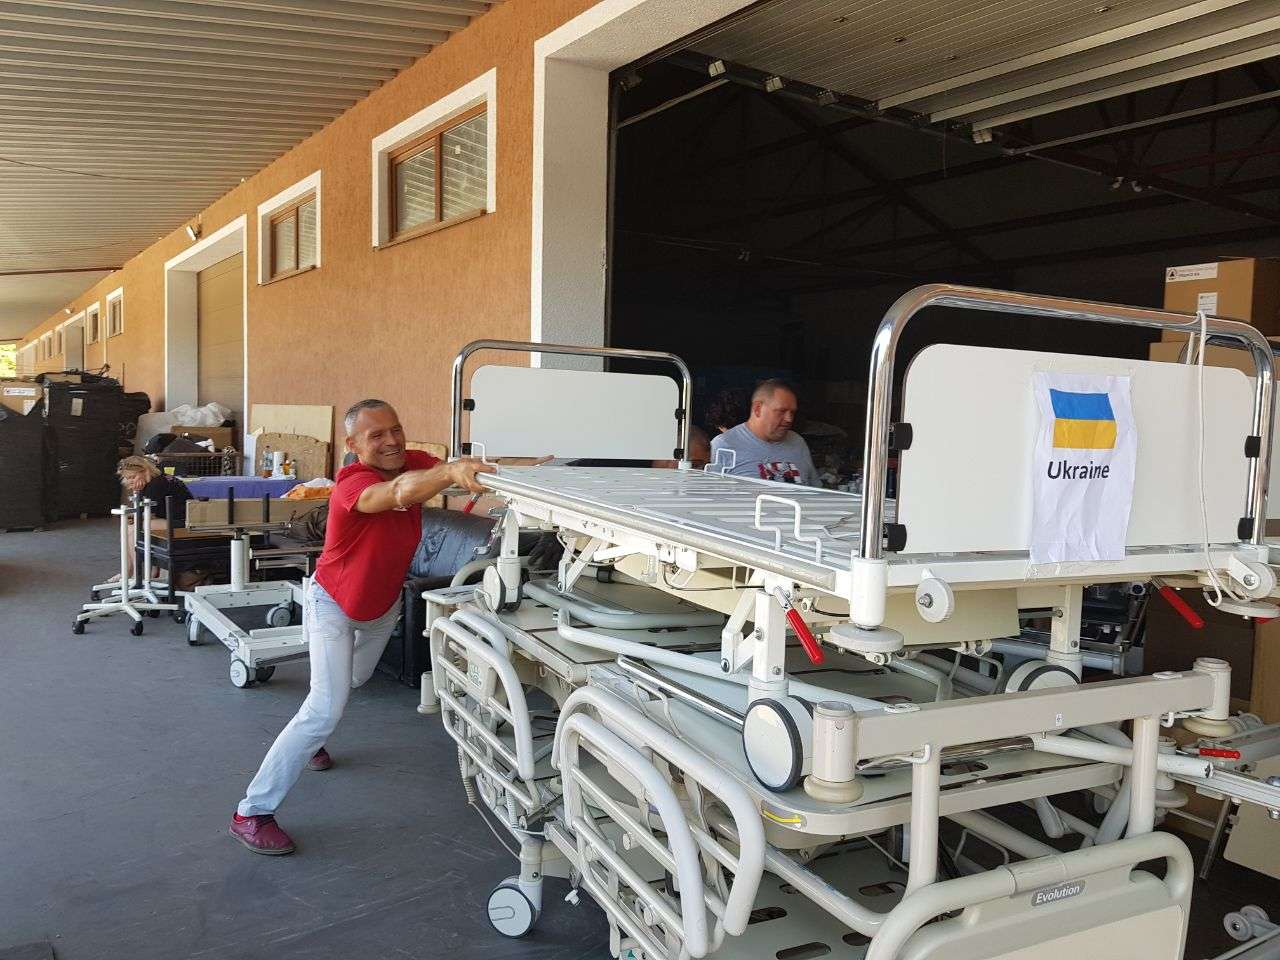 Another shipment of medical beds was delivered to Ukrainian hospitals by Austrian volunteers